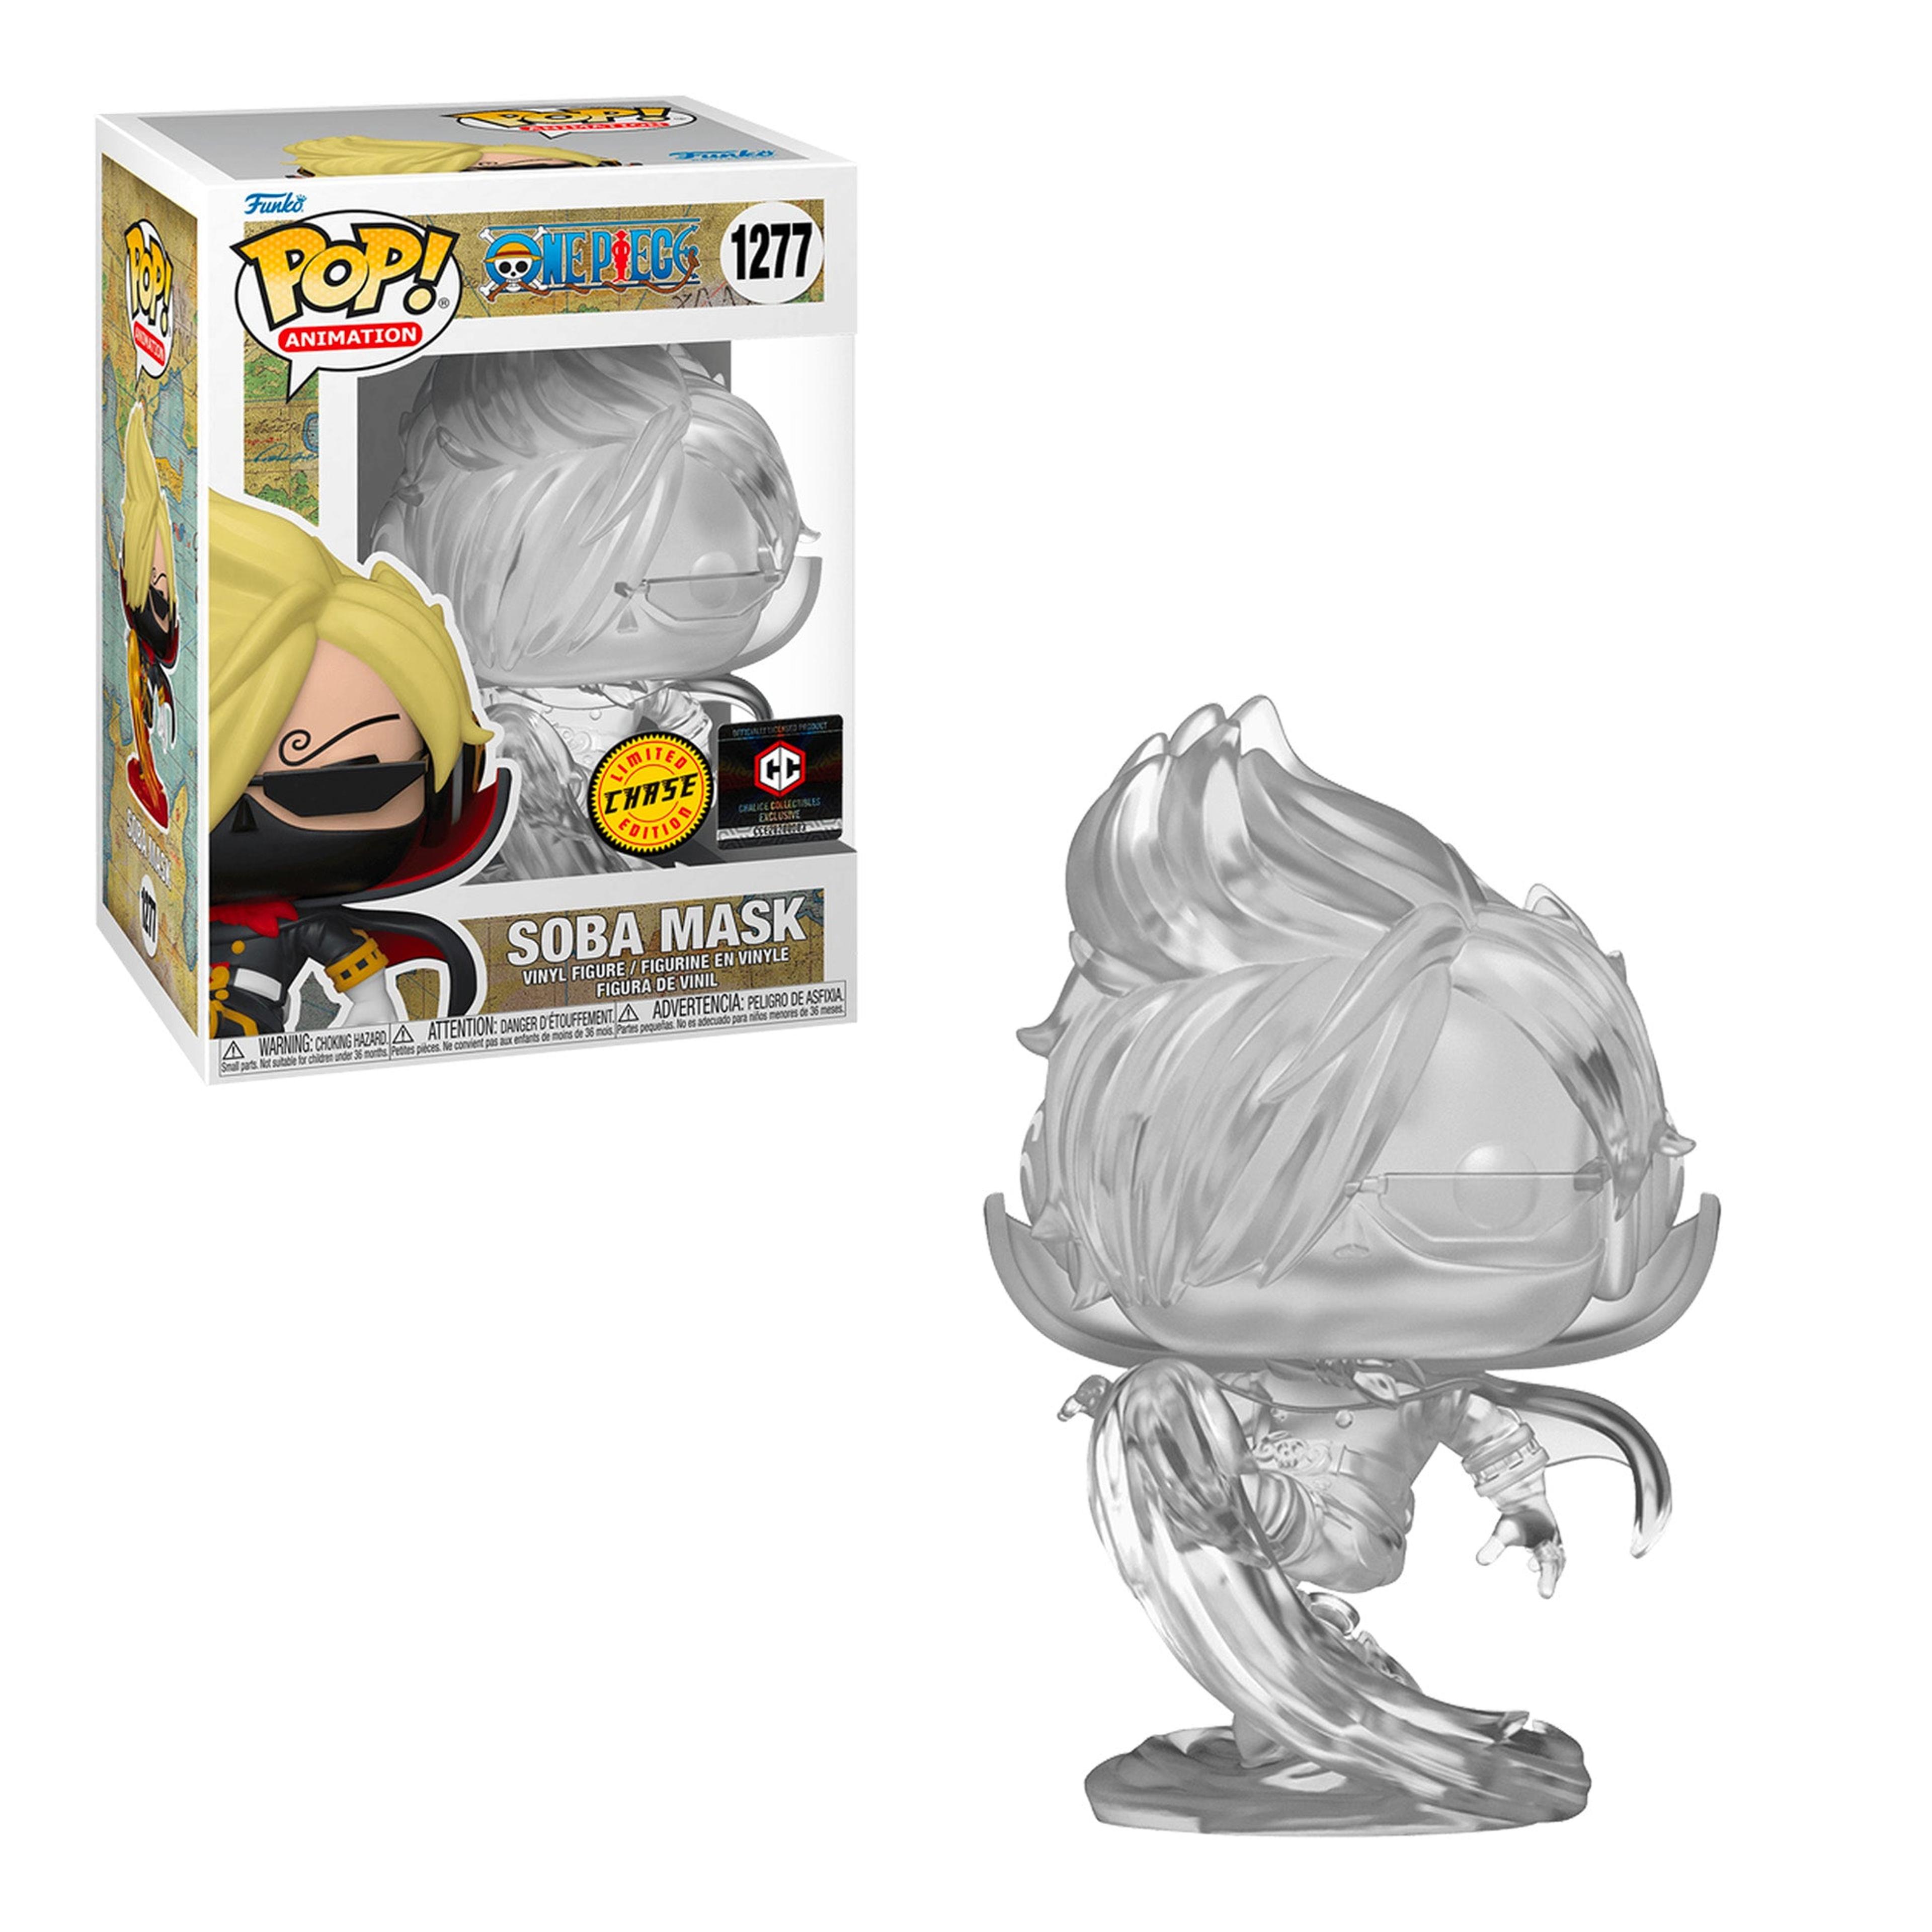 Alternate View 1 of Funko Pop! Animation: One Piece - Soba Mask #1277 Chalice Collec